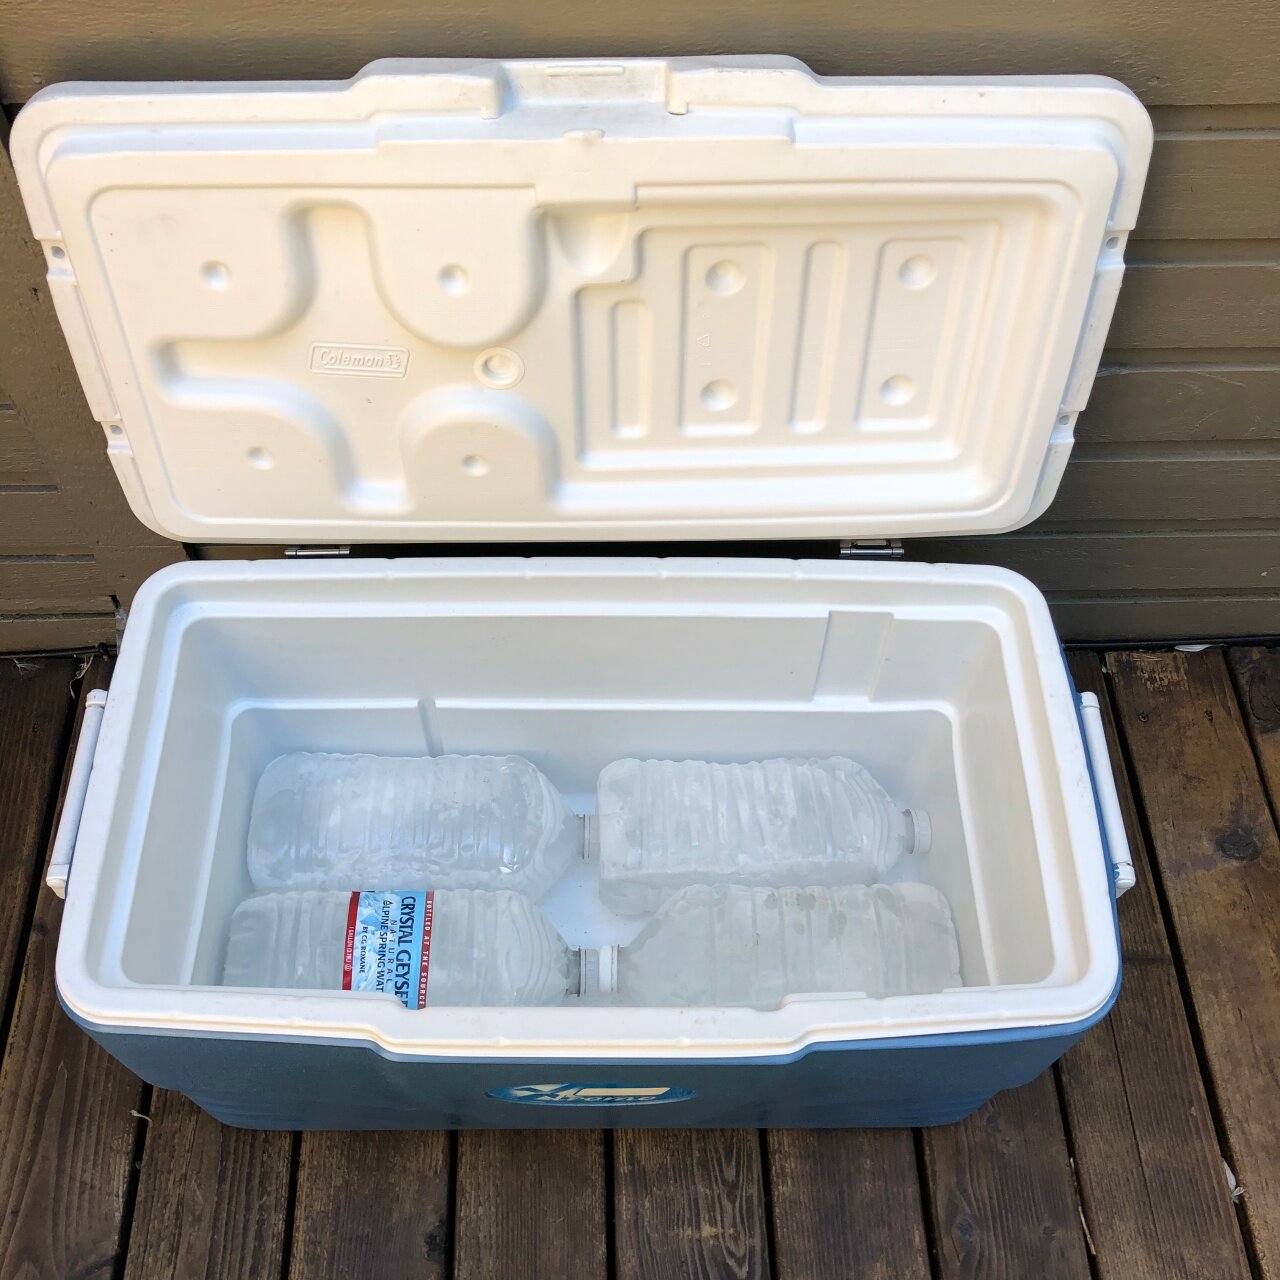 Vintage Coleman 1/3 Gallon Jug Cooler Water Ice Personnal Size